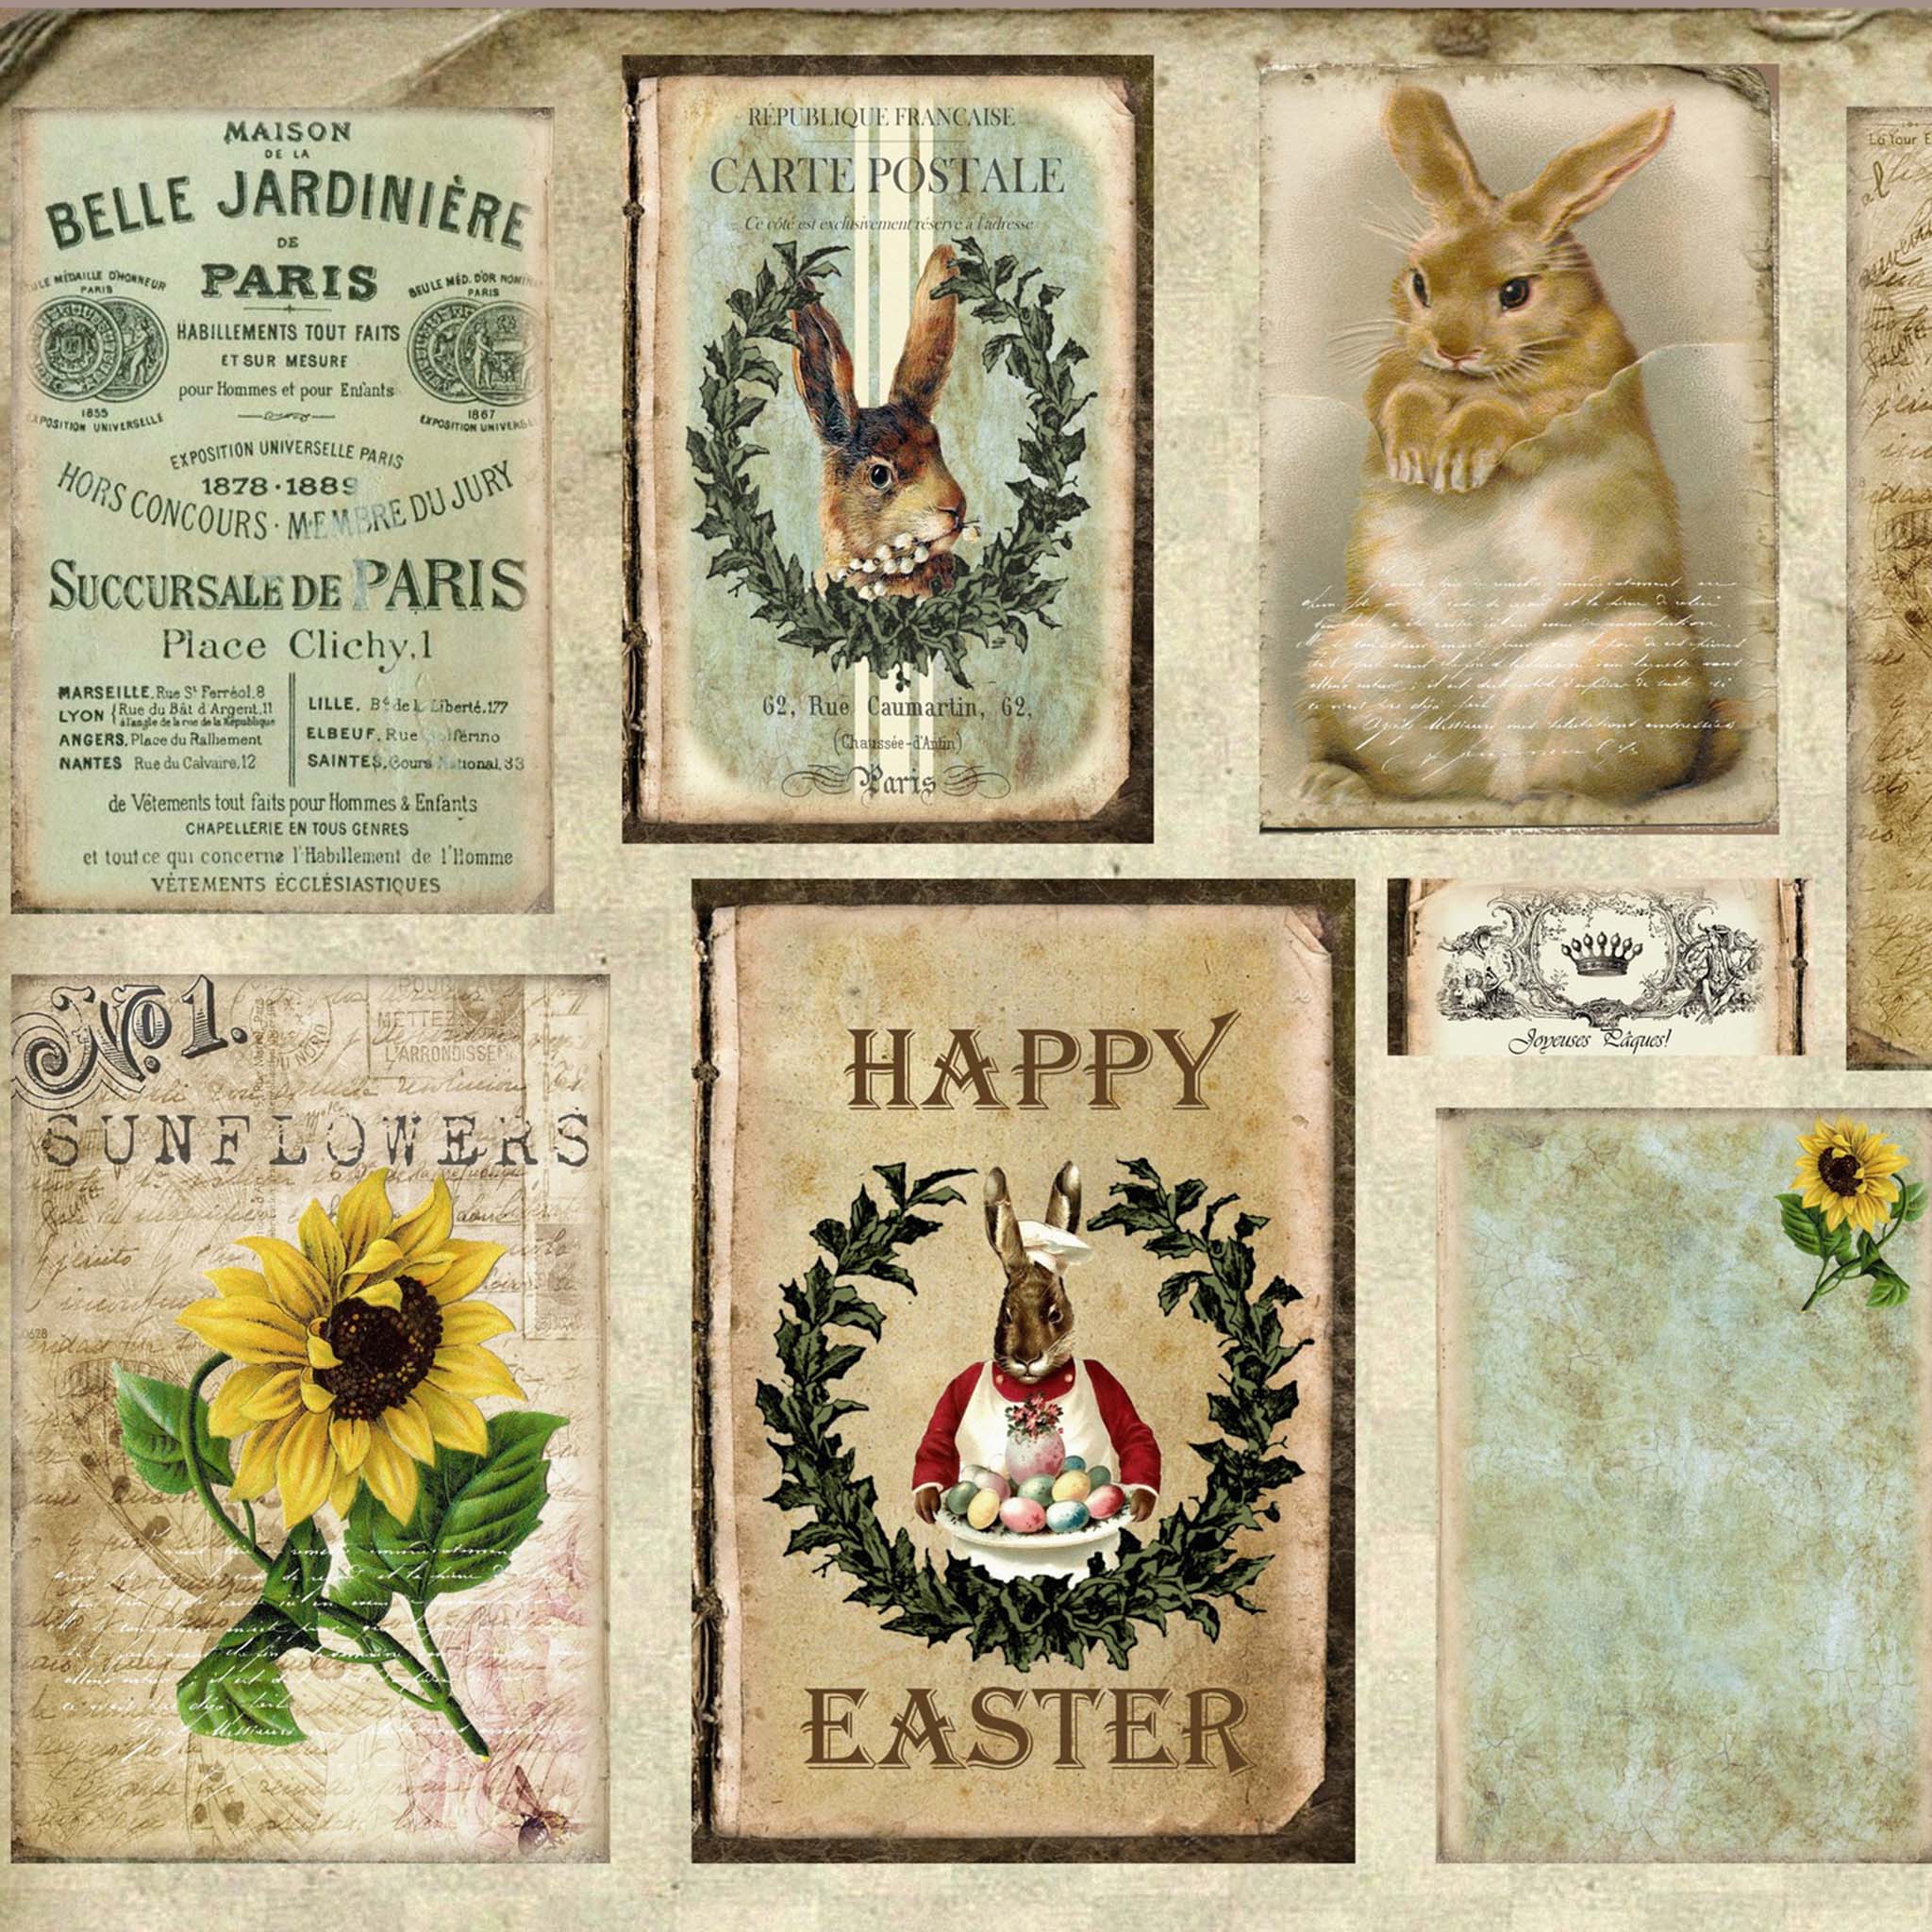 Close-up of a tissue paper that features 9 unique vintage-style designs including bunnies, sunflowers, and an easter image, some set on old documents with French script.